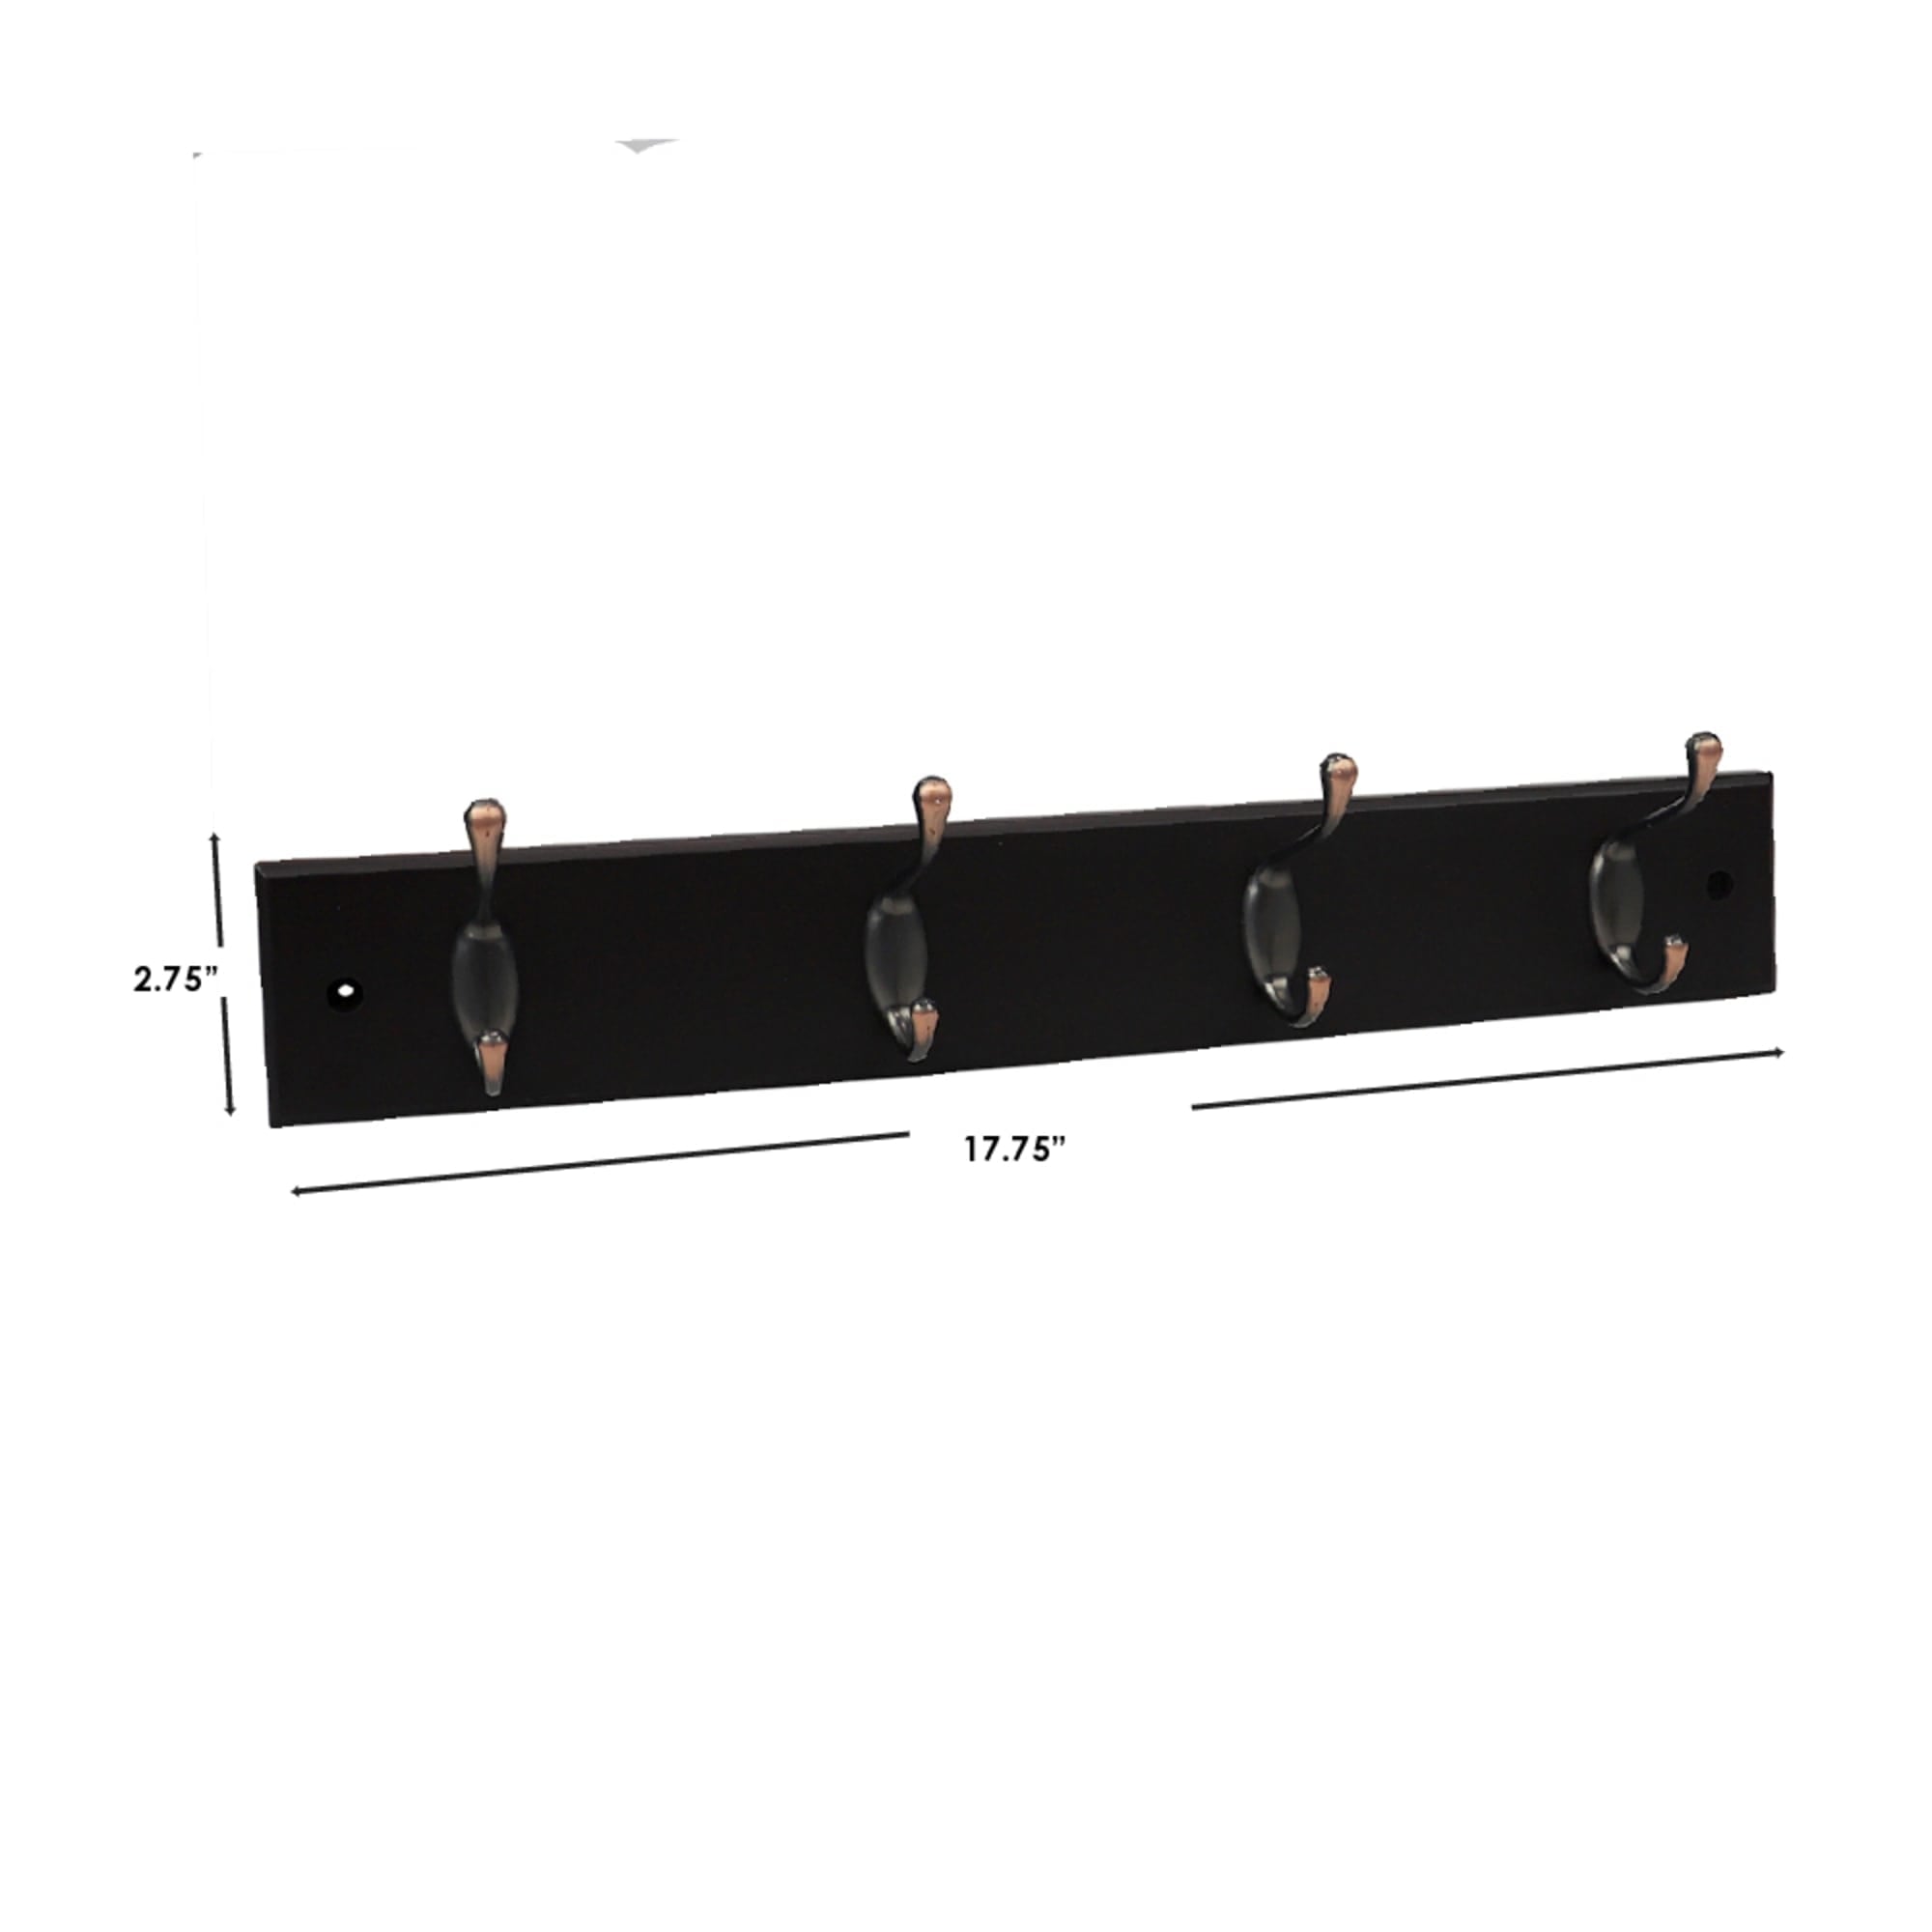 Home Basics 4 Double Hook Wall Mounted Hanging Rack, Brown $10.00 EACH, CASE PACK OF 12